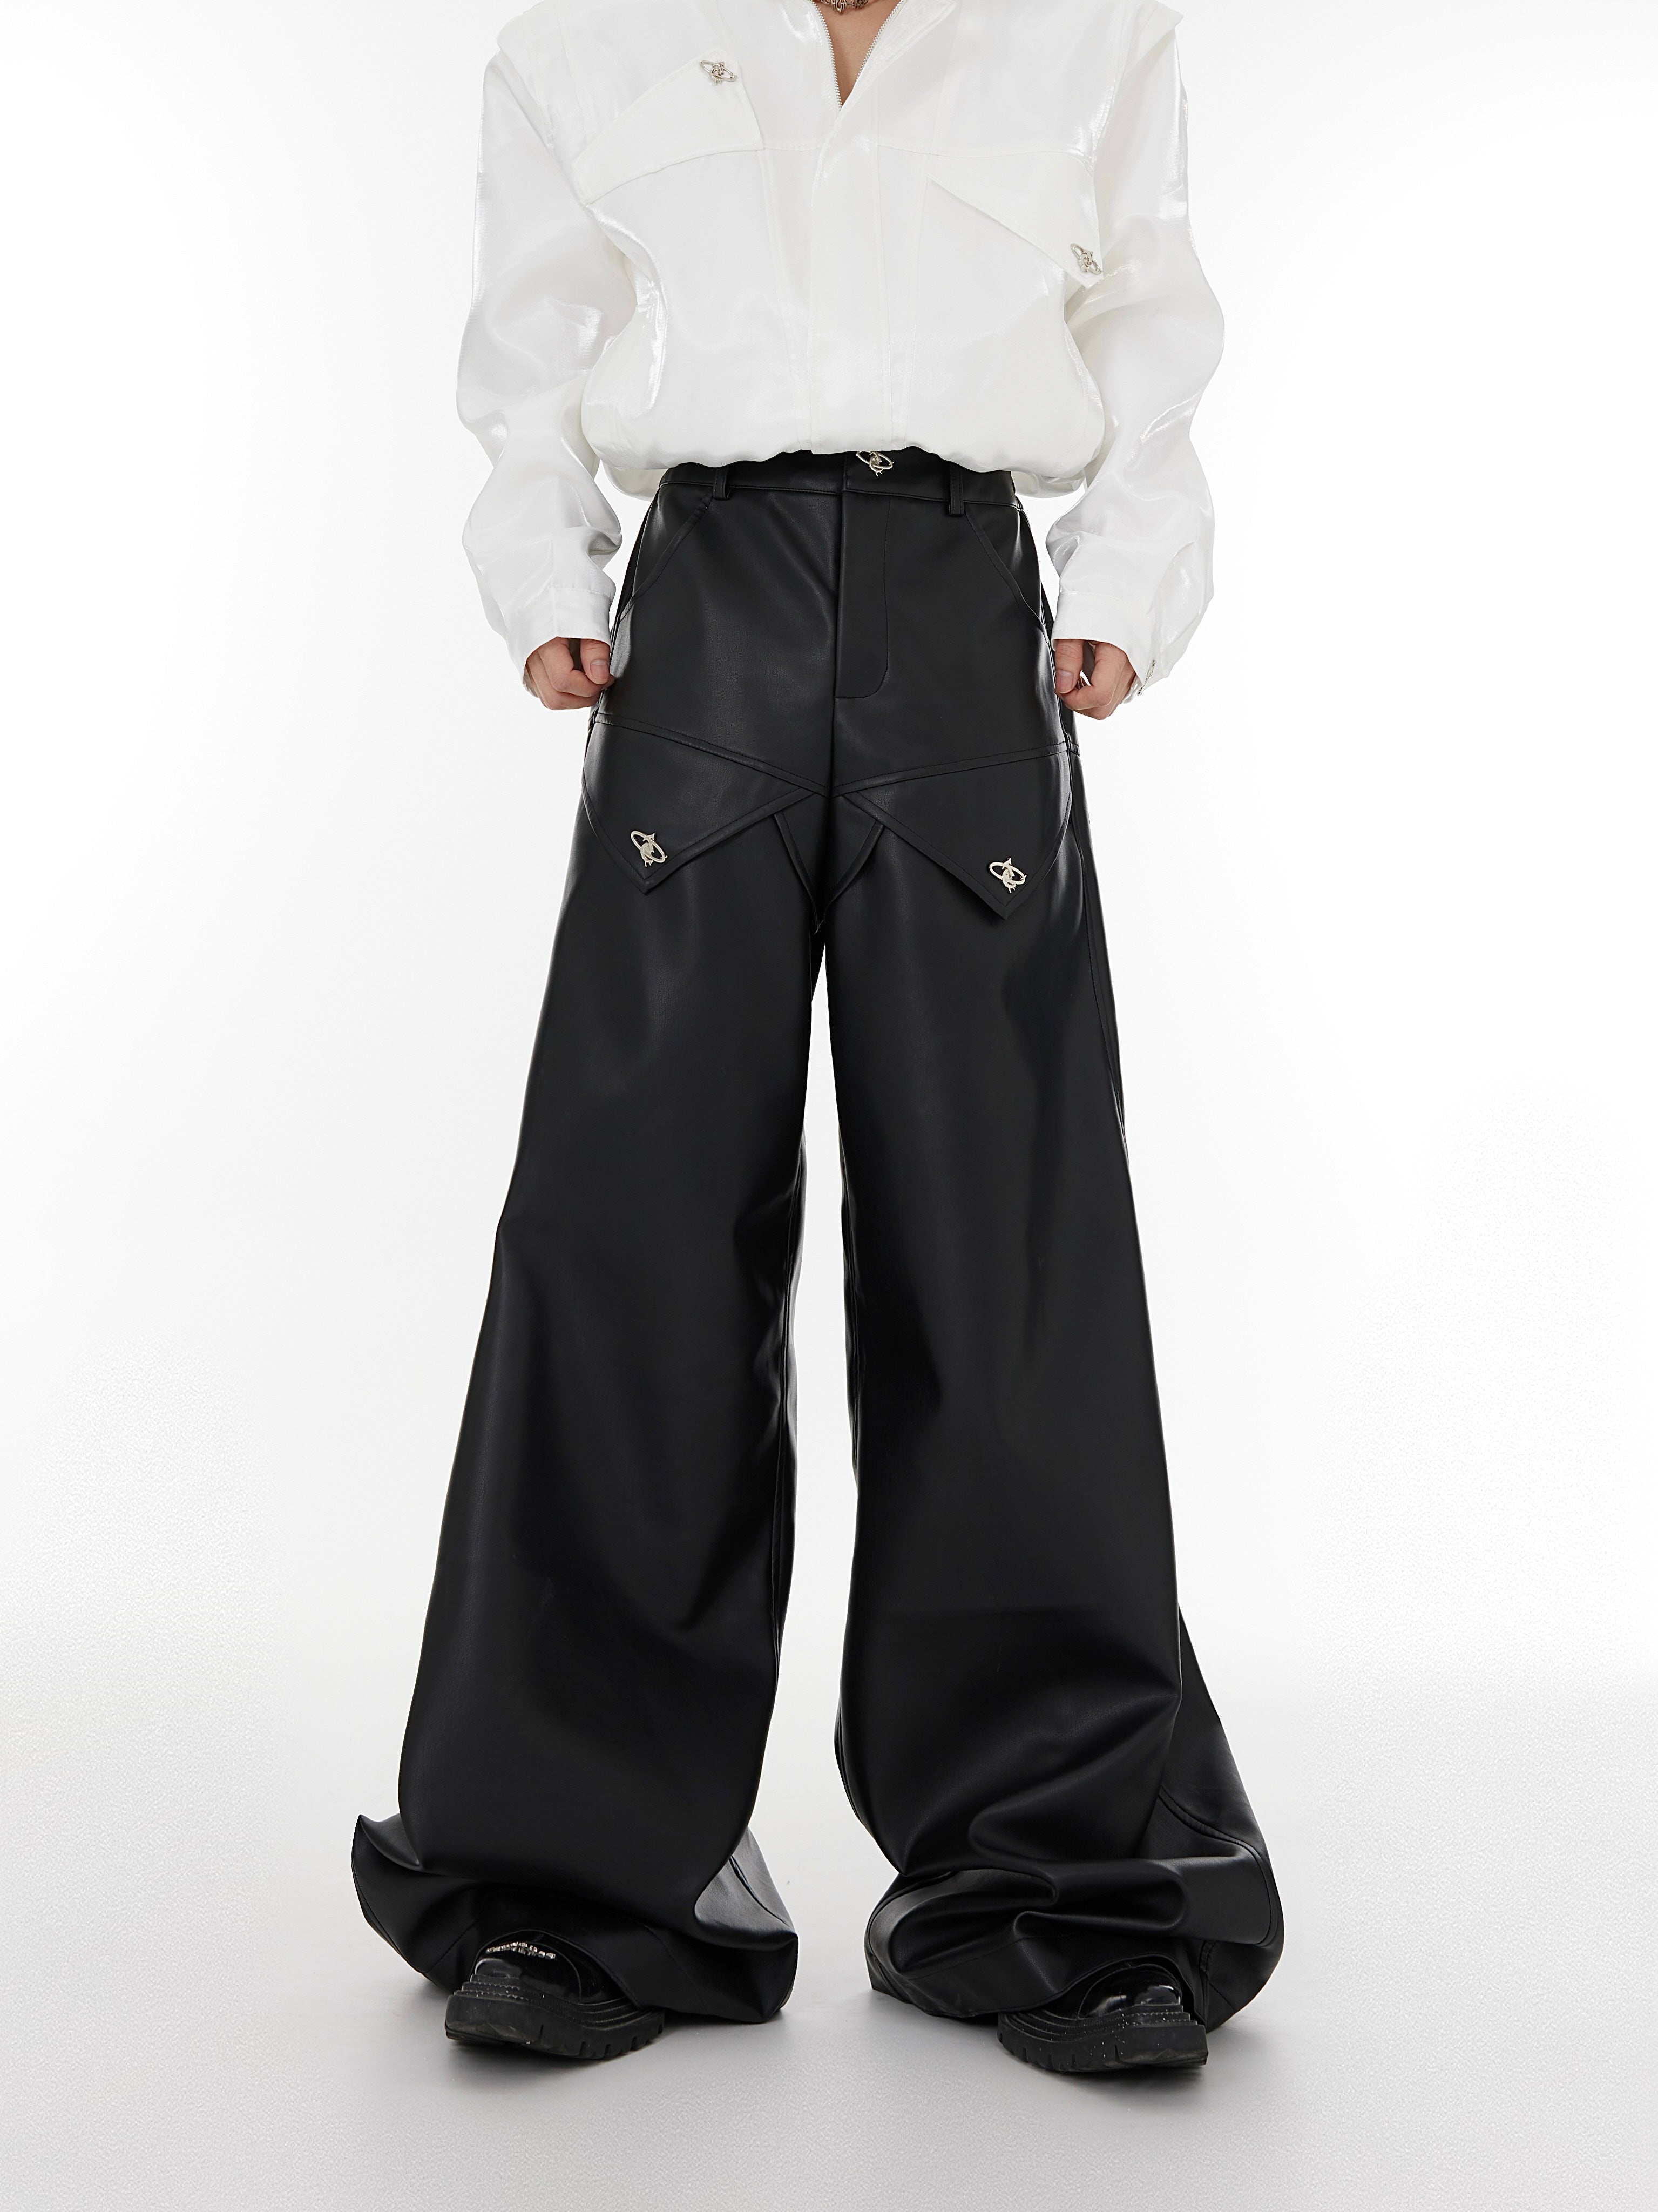 AKM】 Loose Glossy Leather Pants with Large Pockets